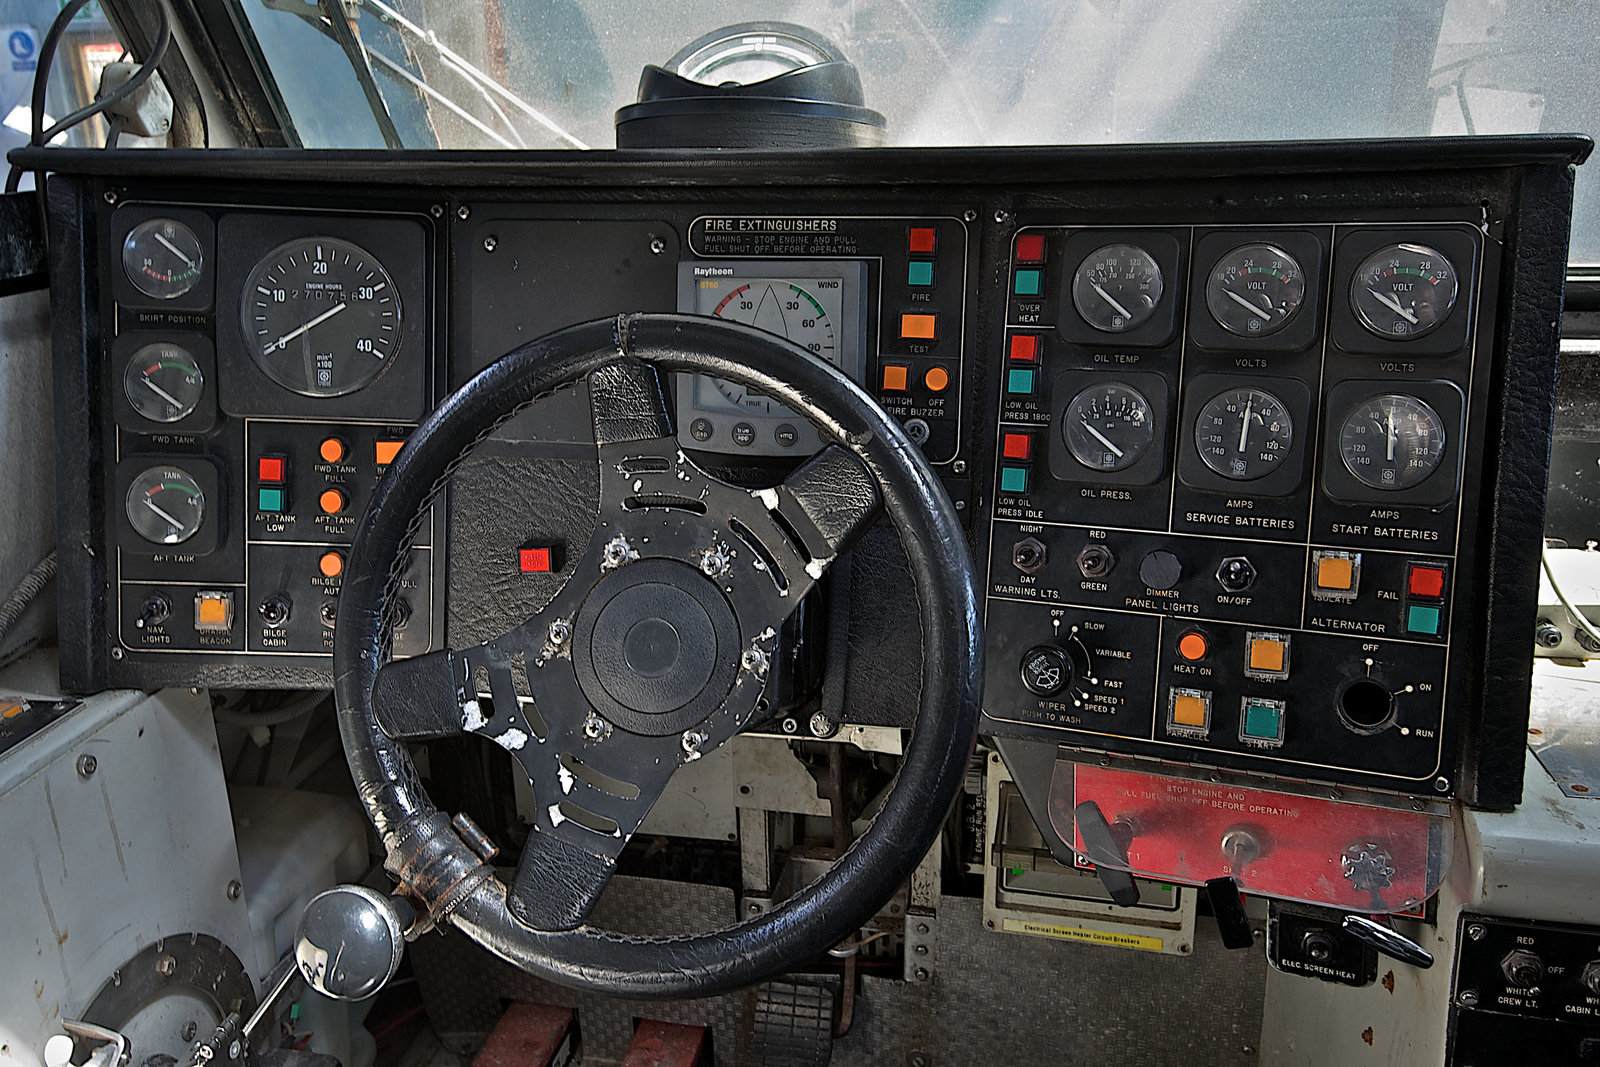 Cockpit control panel and steering wheel